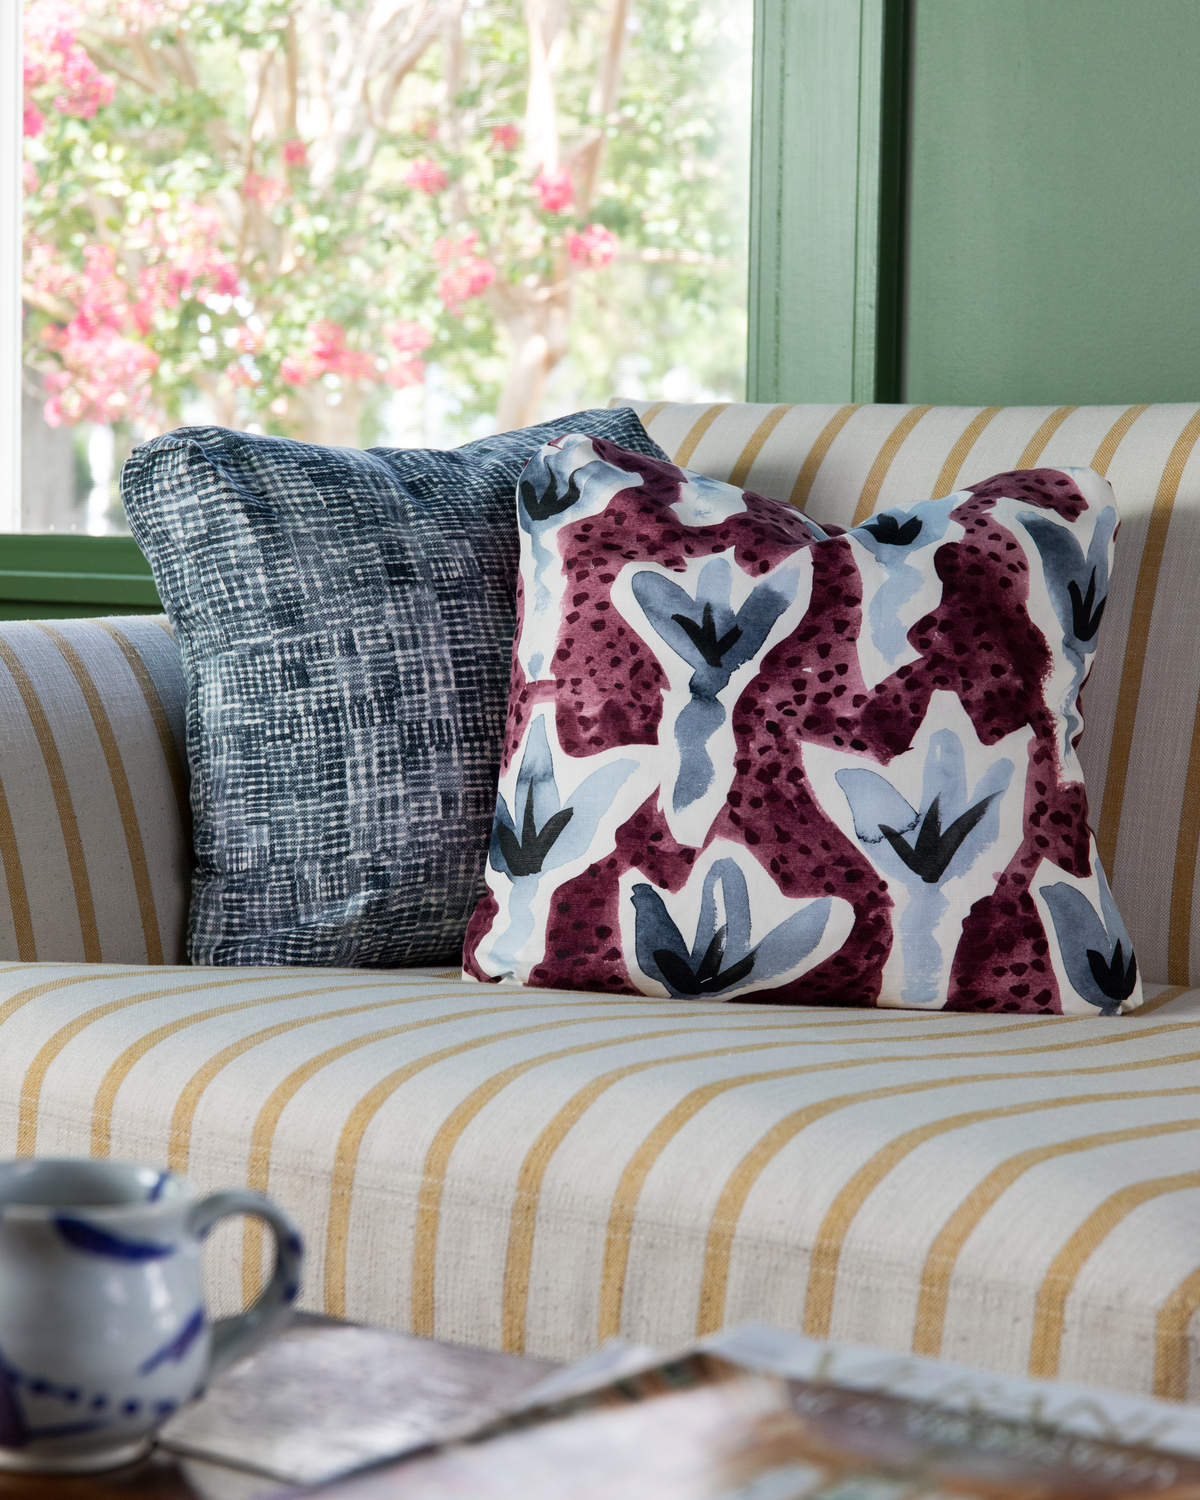 Market Stripe Upholstery in Goldenrod, Hatchmarks in Navy Pillow, and Sprigs in Eggplant/Blue Pillow